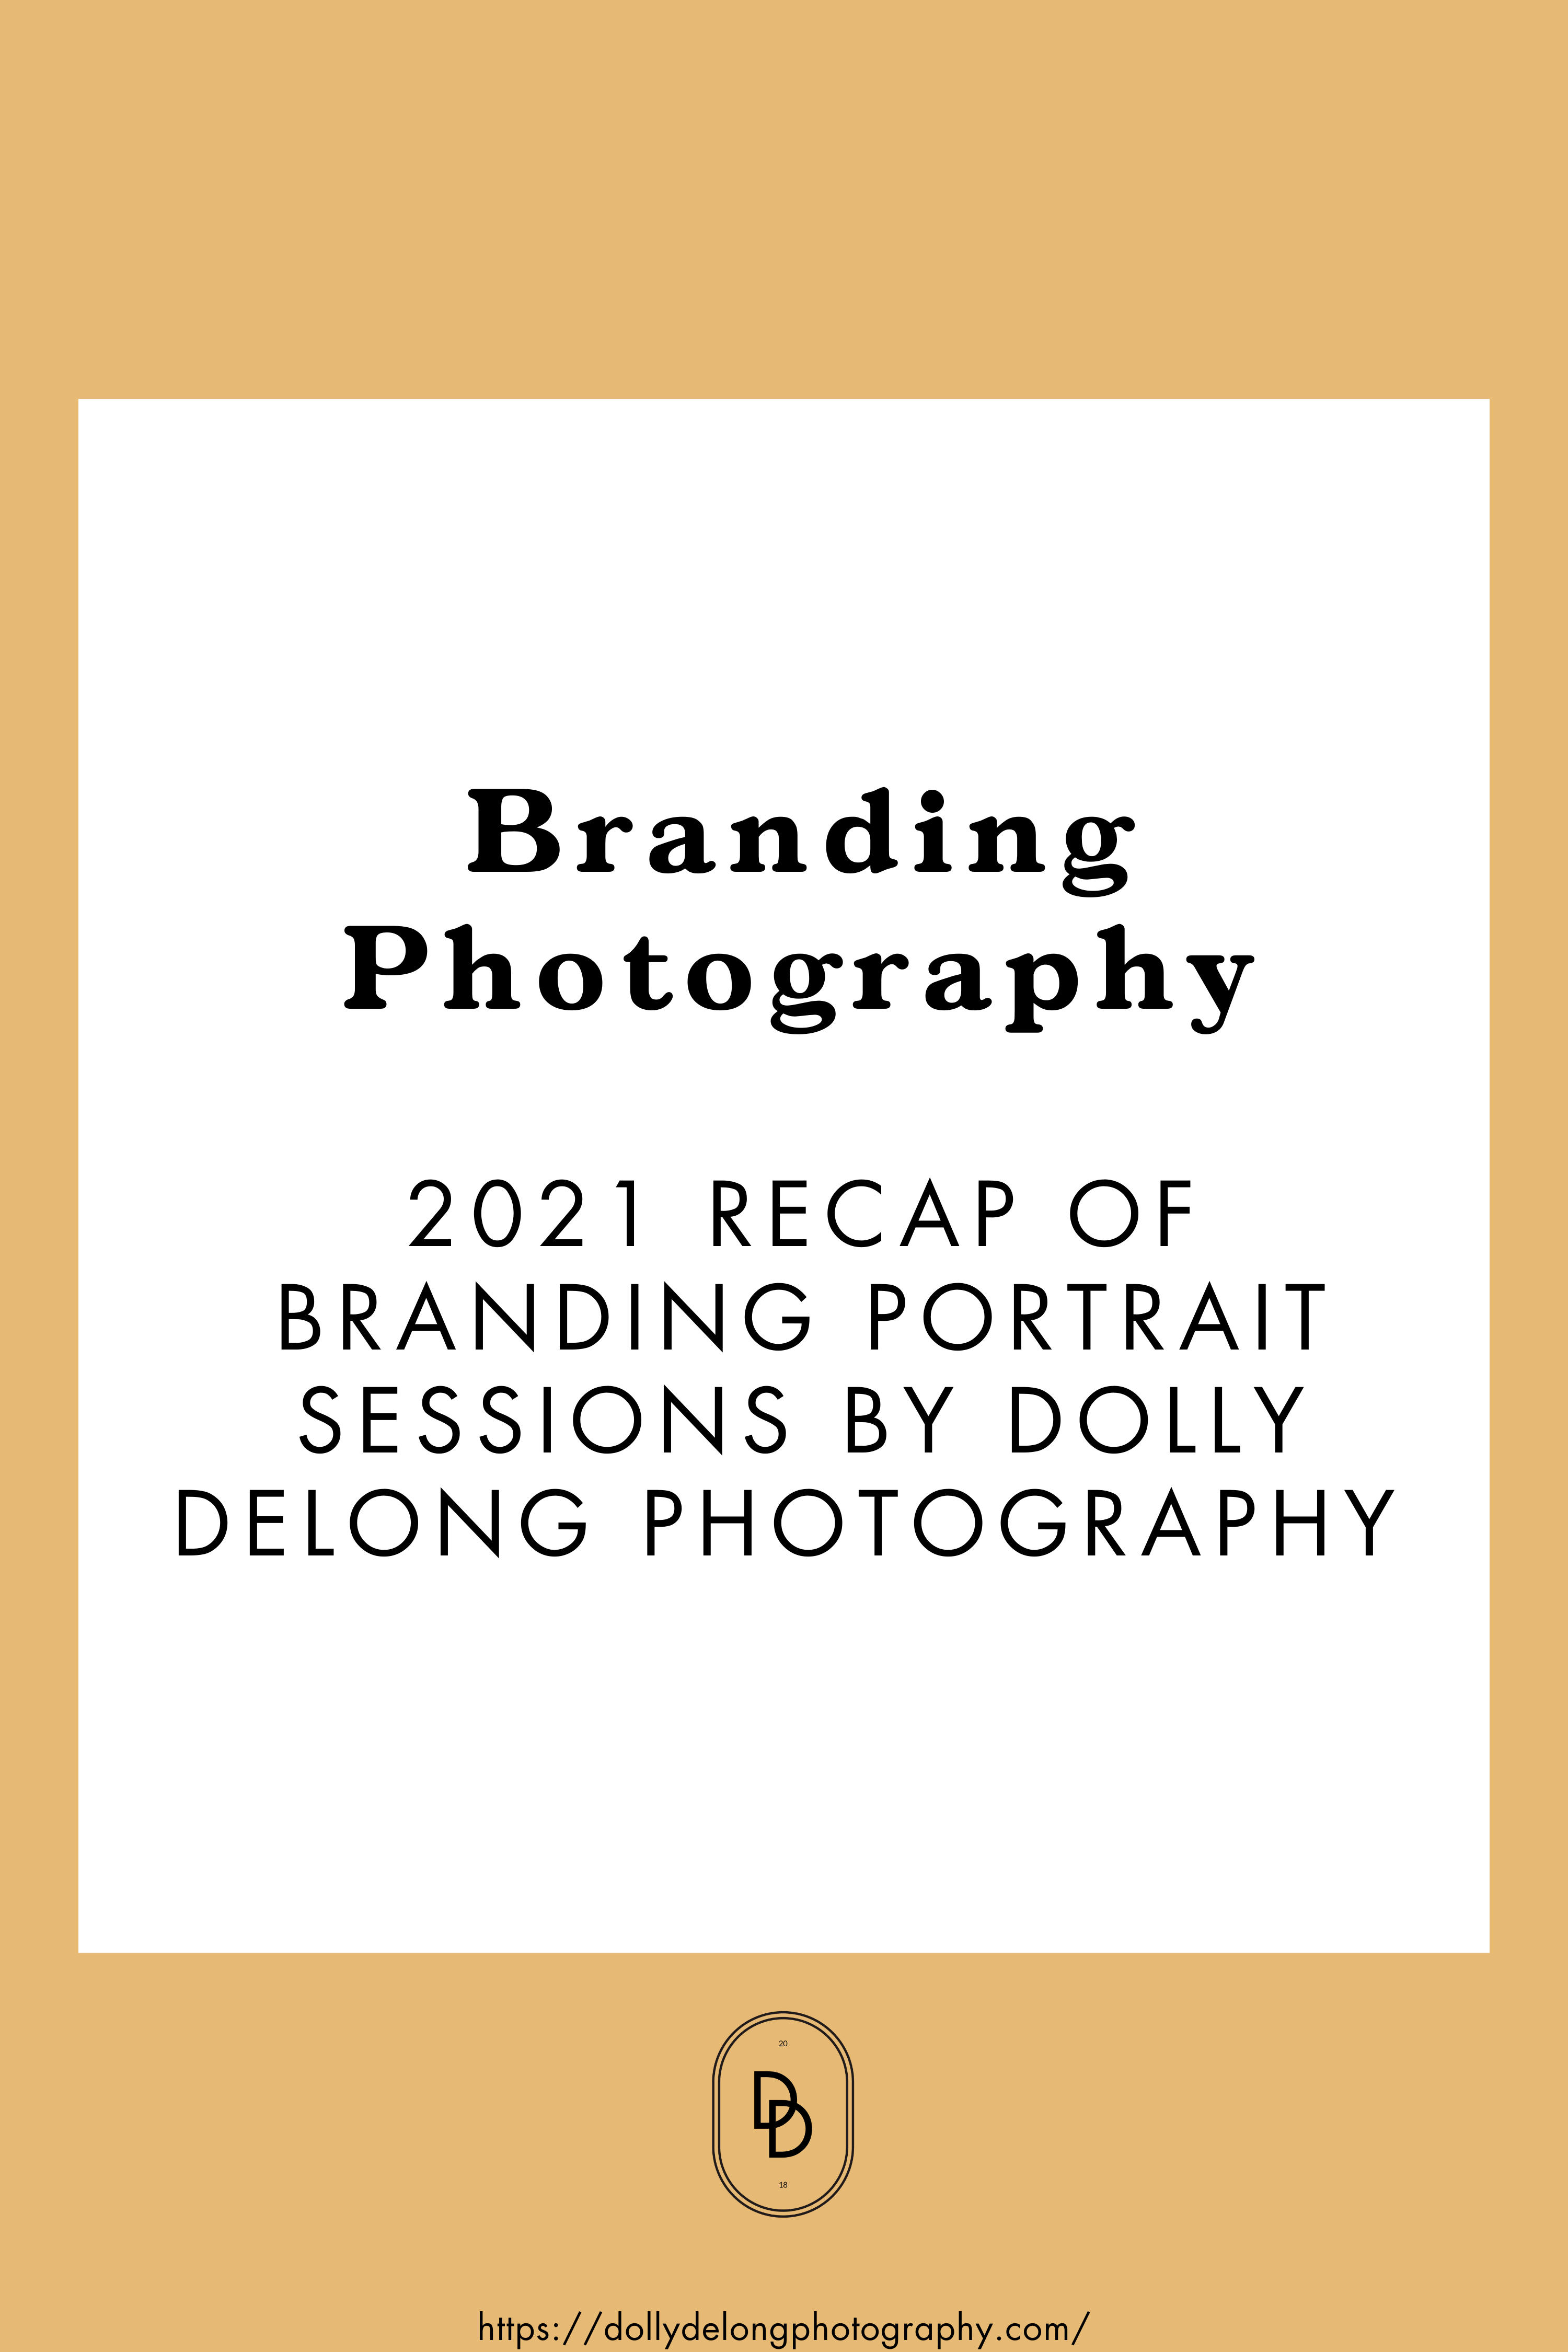 2021 Recap Of Branding Portrait Sessions by Dolly DeLong Photography